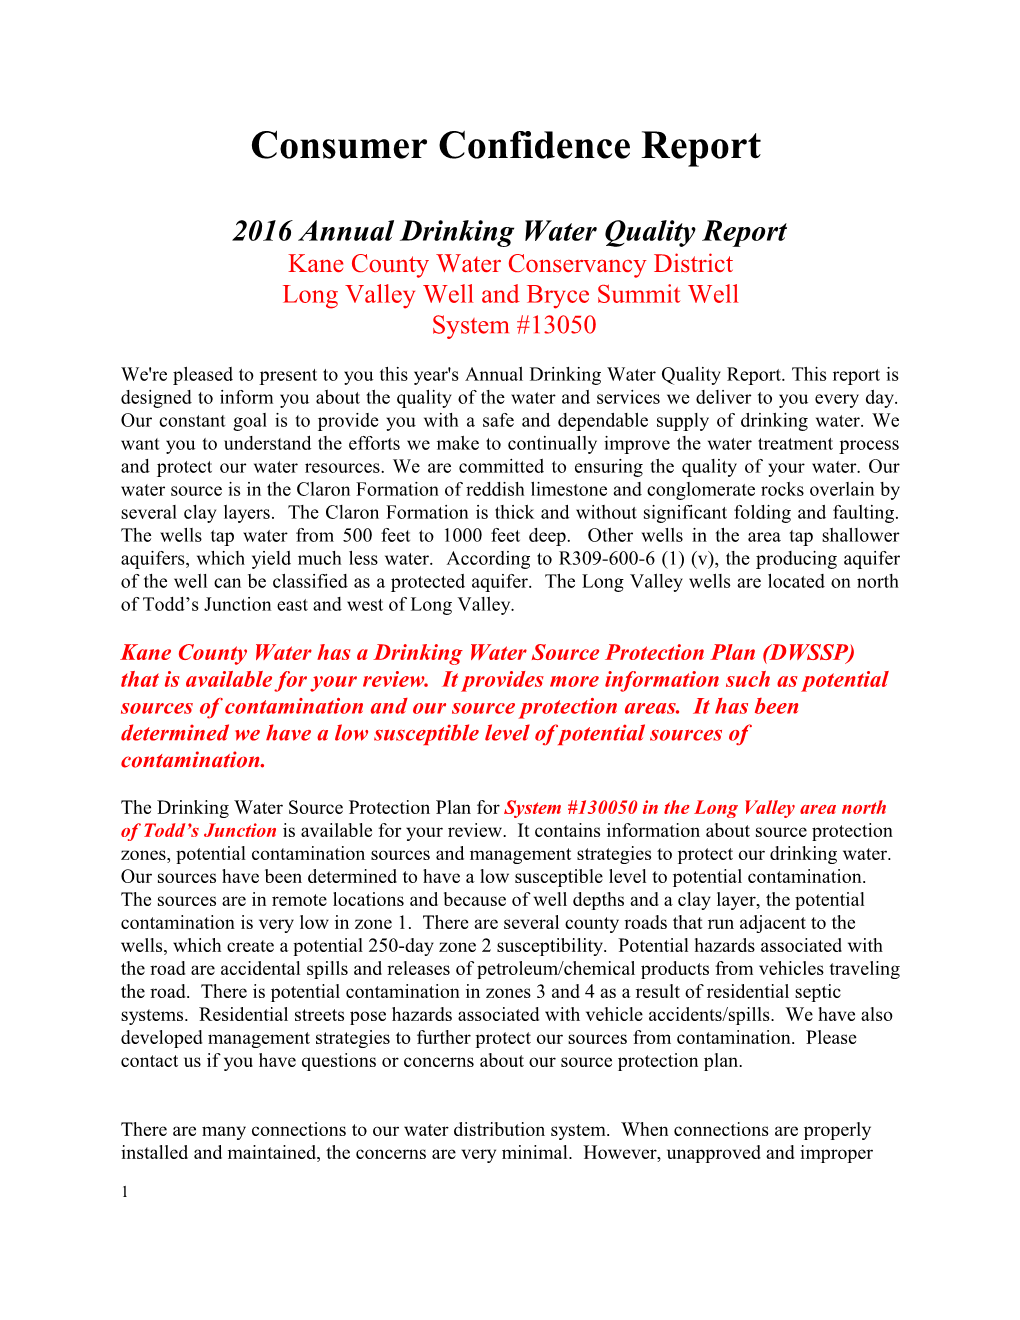 2016Annual Drinking Water Quality Report